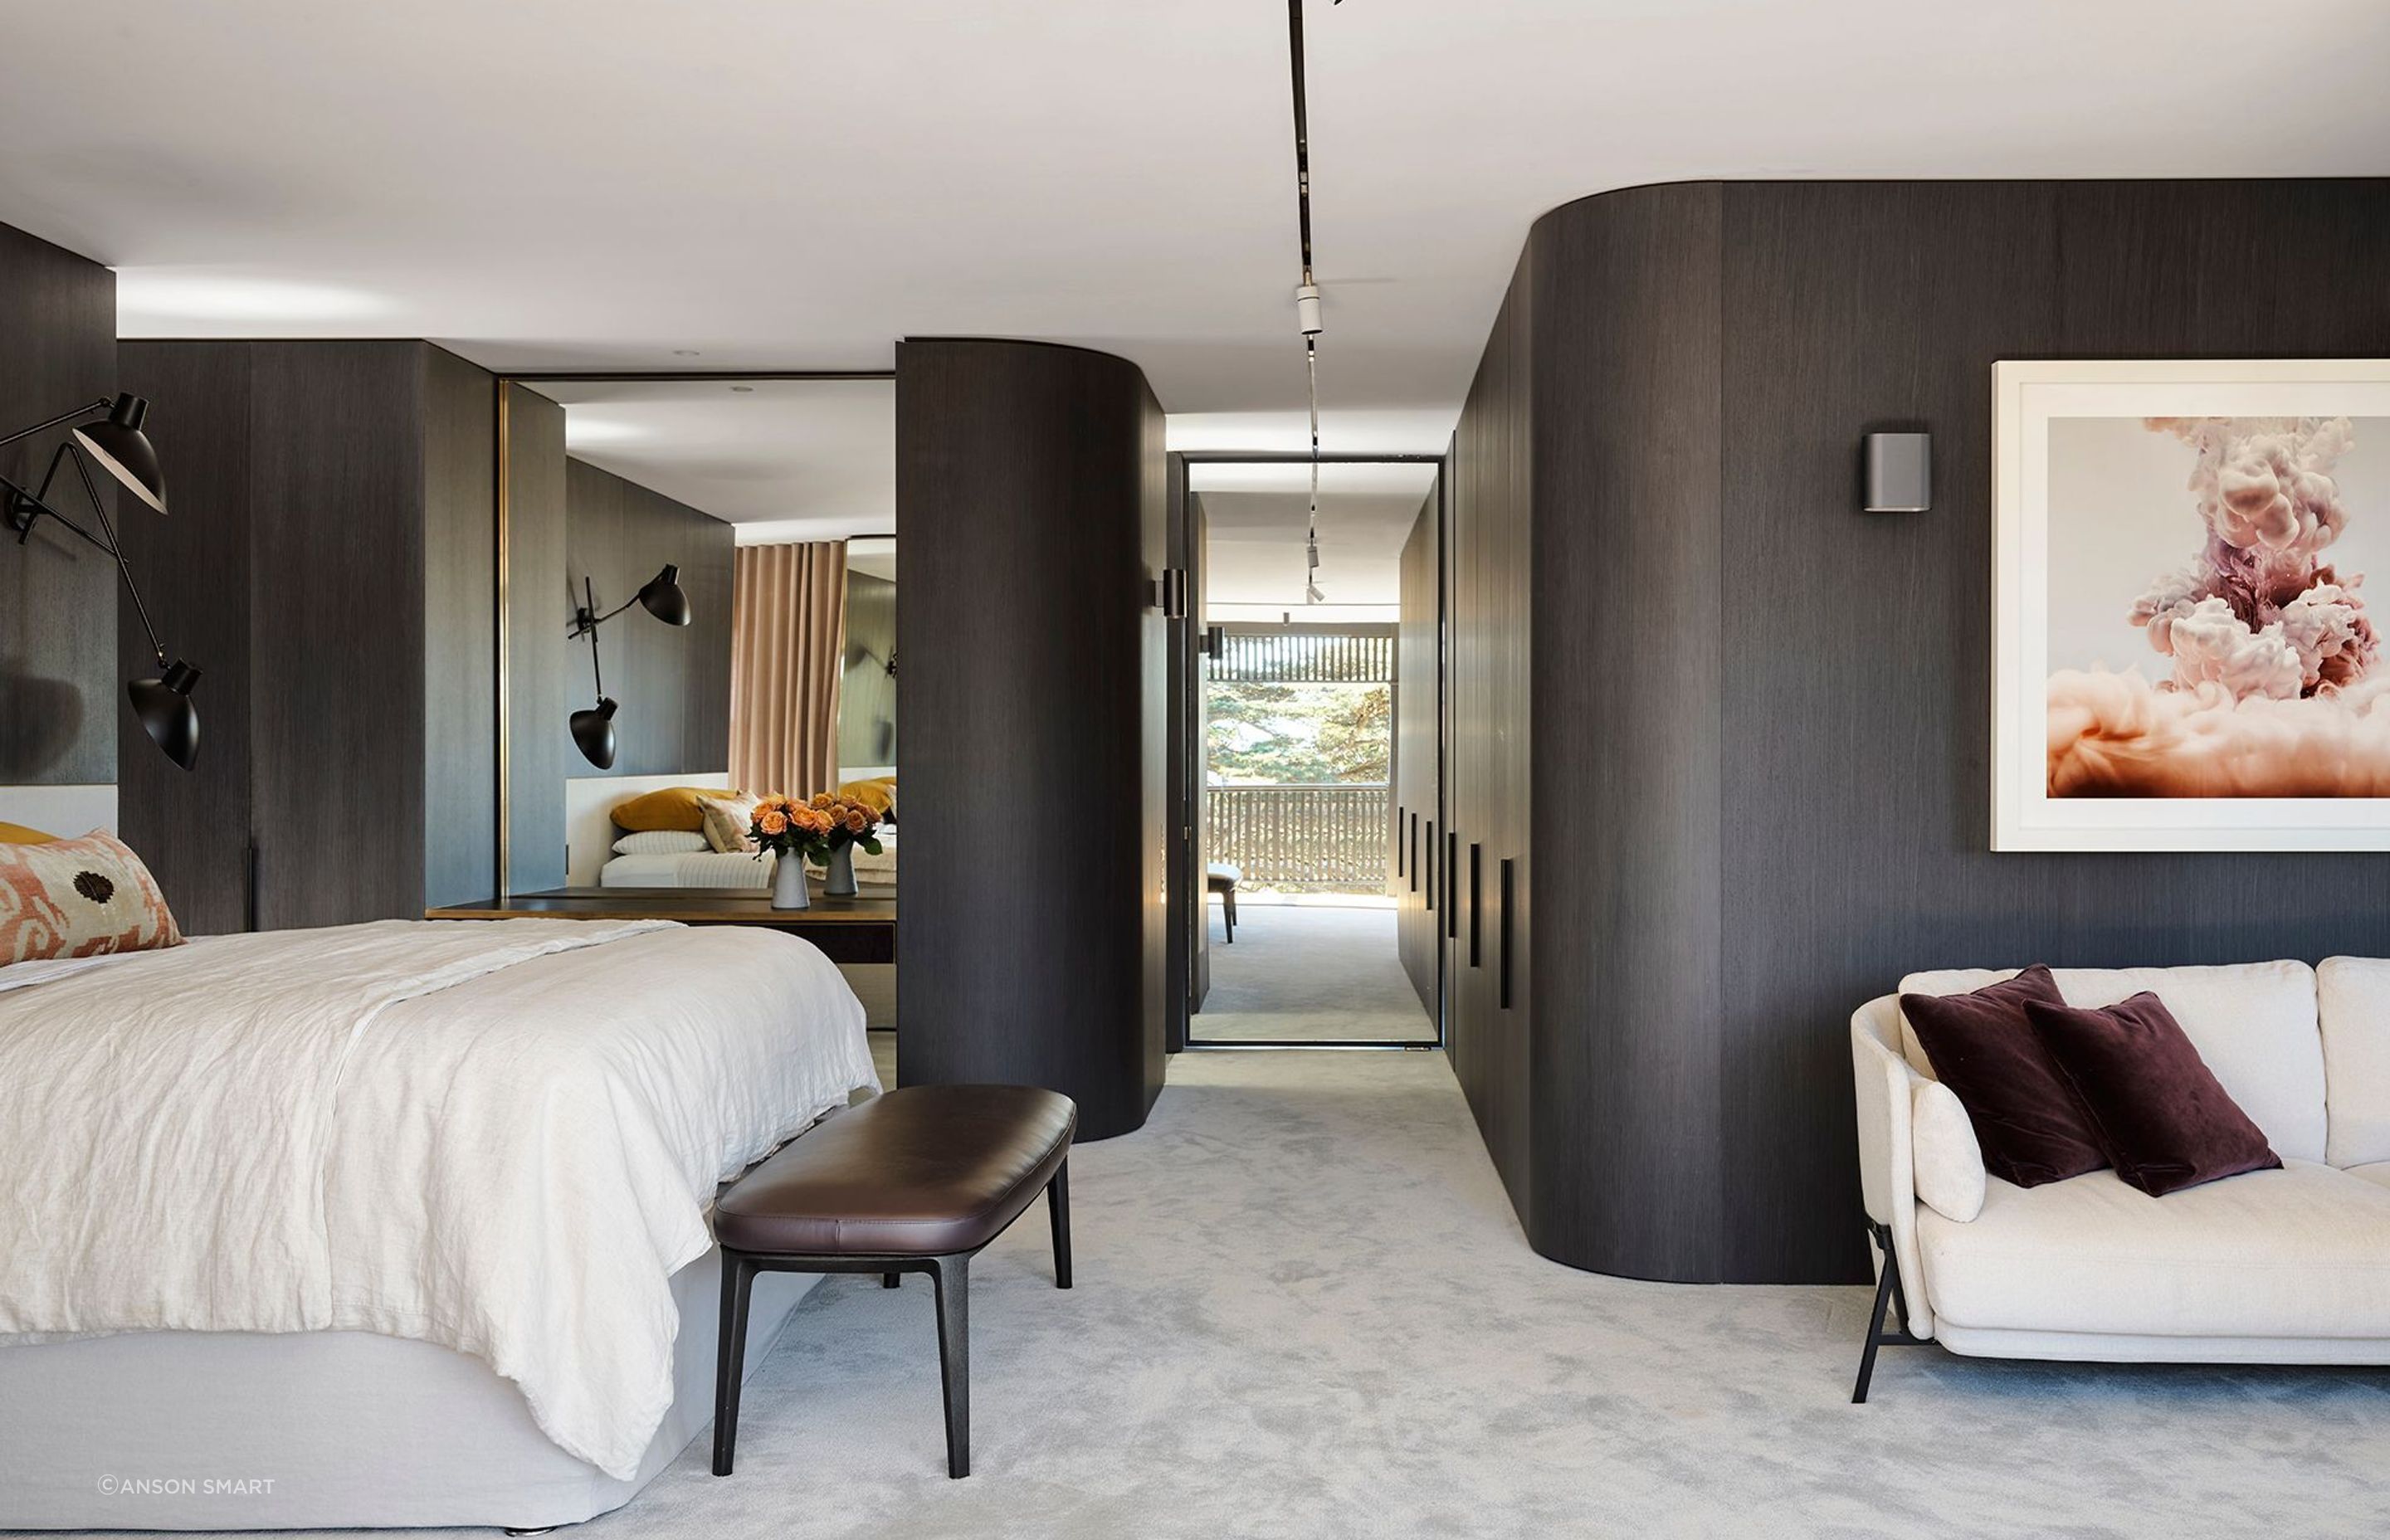 Curved walls soften the main bedroom suite featuring Joseph Giles architectural hardware throughout.